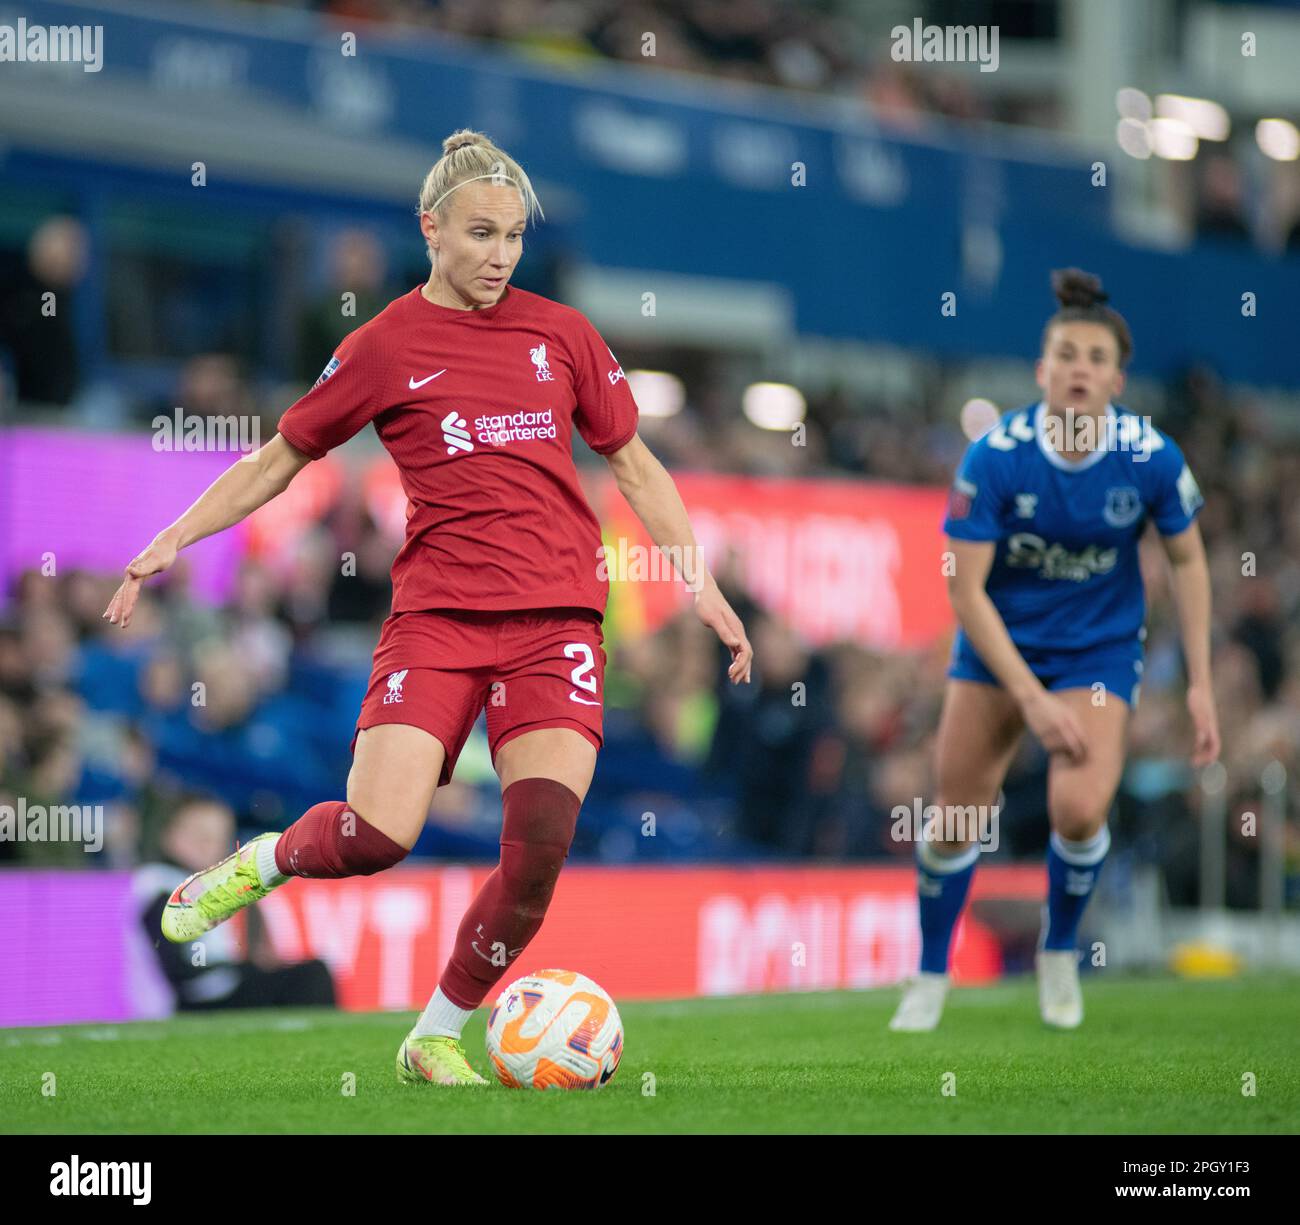 Liverpool's Emma Koivsto passes the ball, during Everton Football Club V Liverpool Football Club at Goodison Park, in the Barclays Women’s Super League (Credit Image: ©Cody Froggatt/ Alamy Live News) Stock Photo